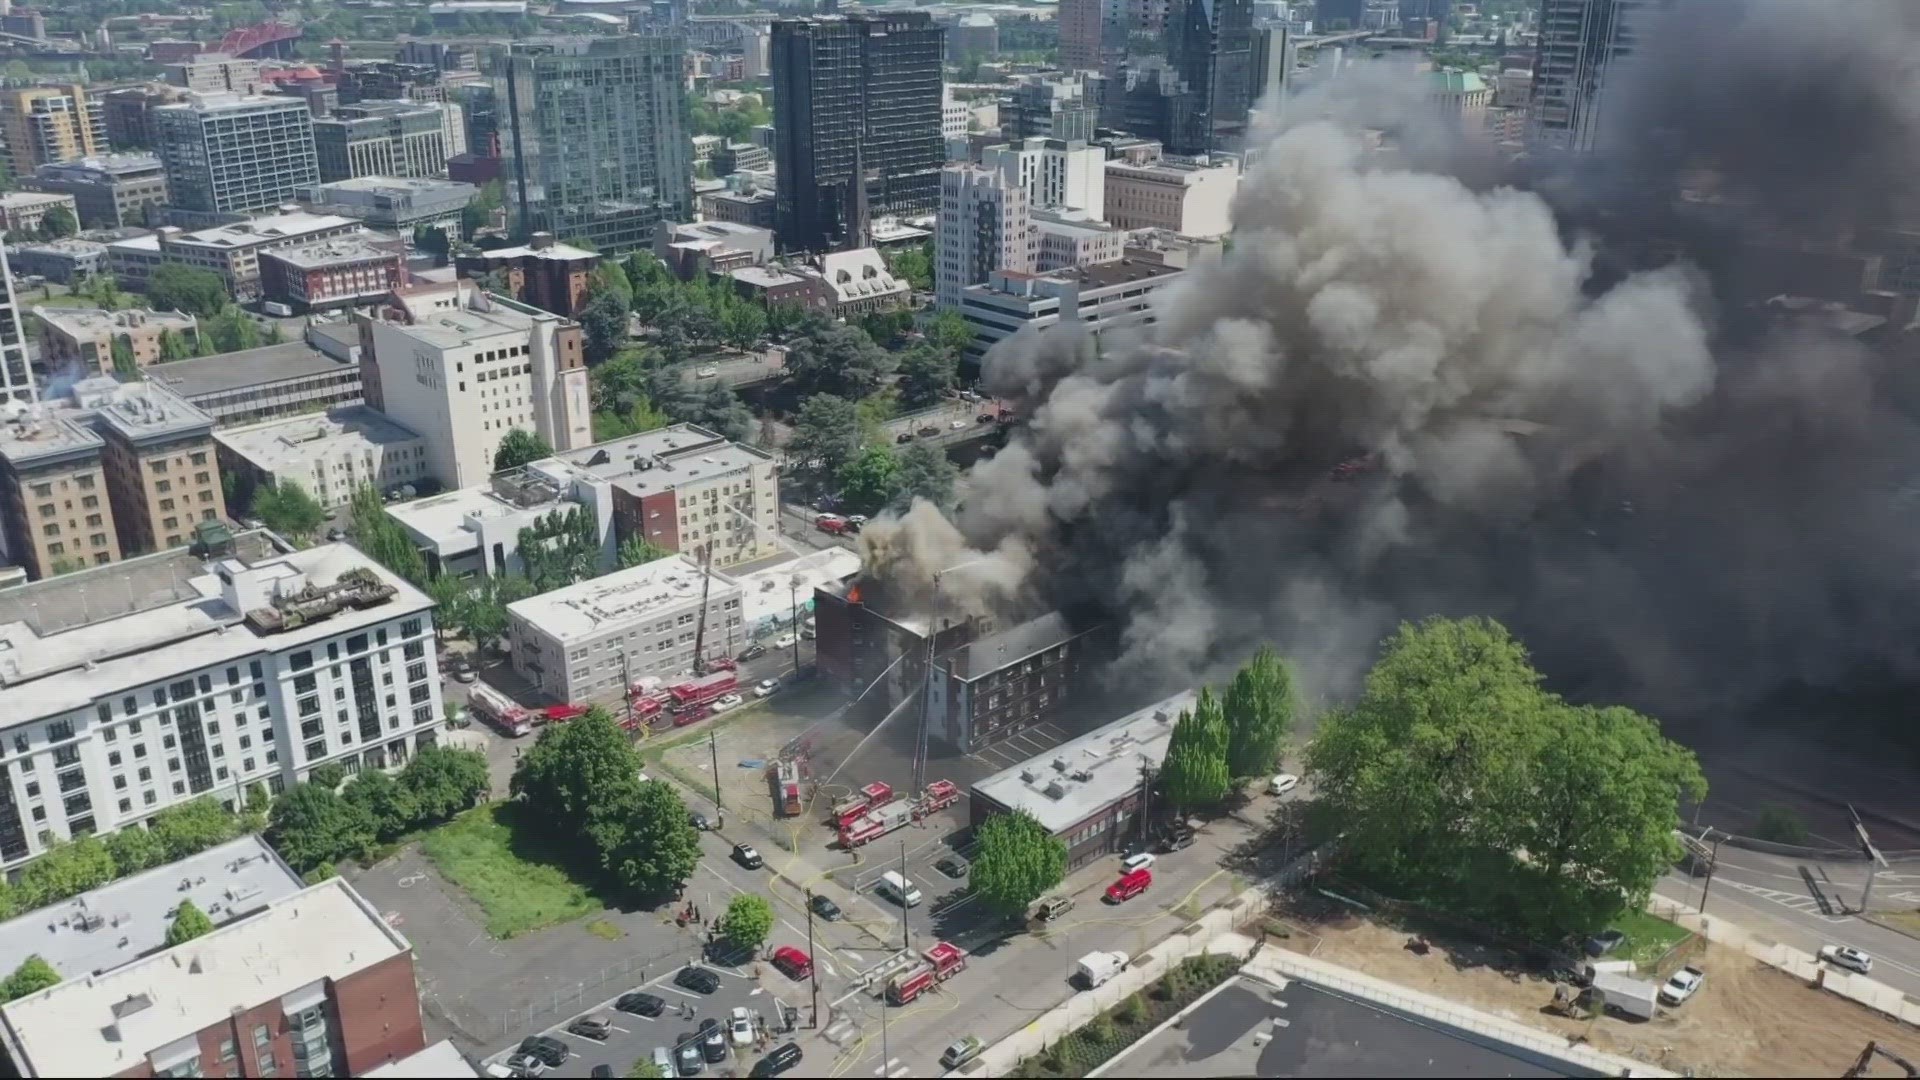 The 5-story building at Southwest 14th and Taylor was heavily engulfed in smoke on the morning of May 16, and the fire continued to burn into the afternoon.